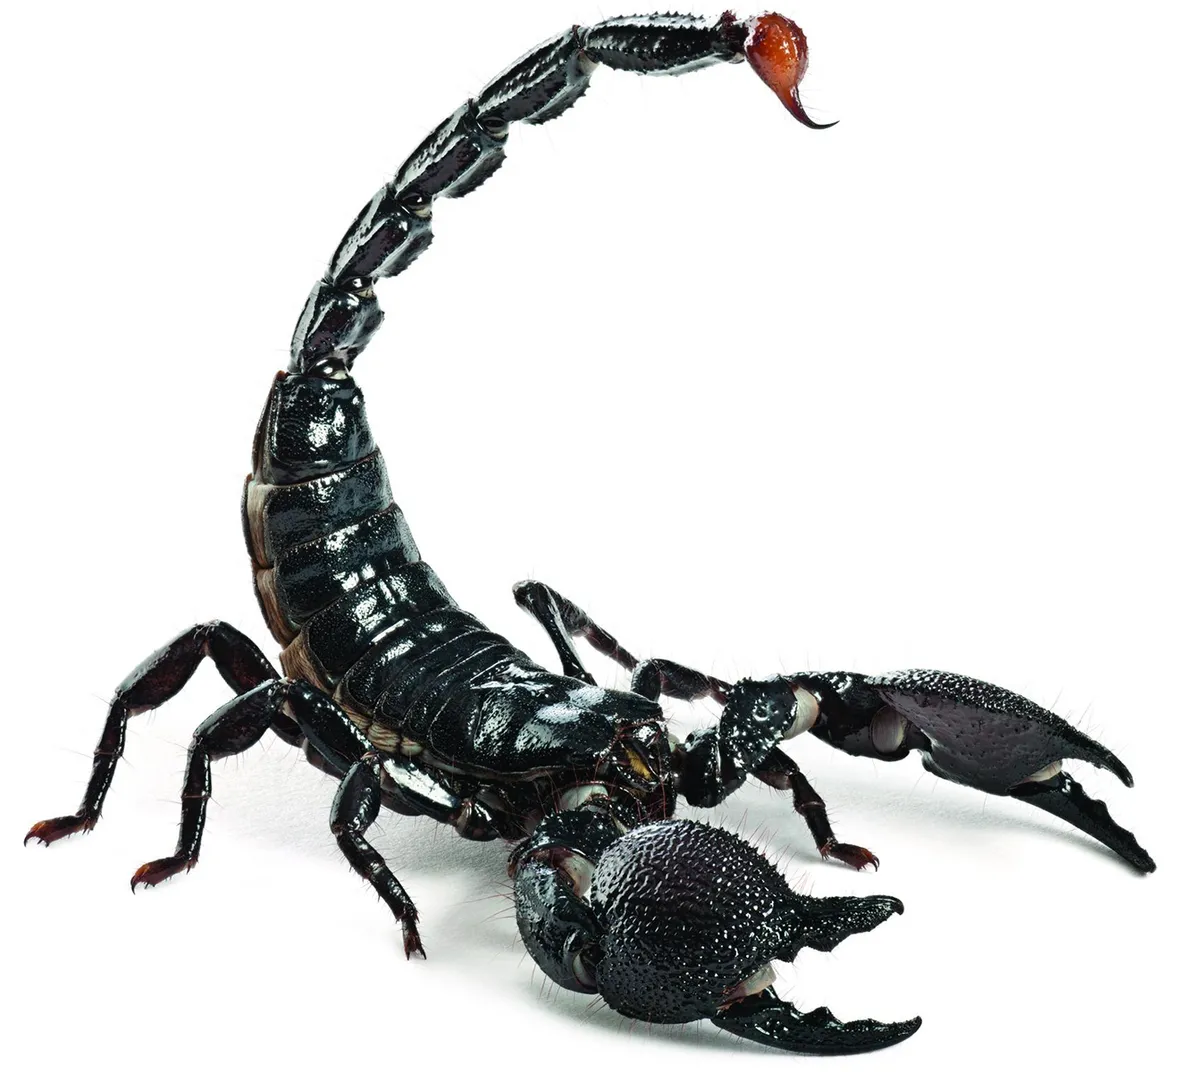 A scorpion, one of the world's most dangerous animals.